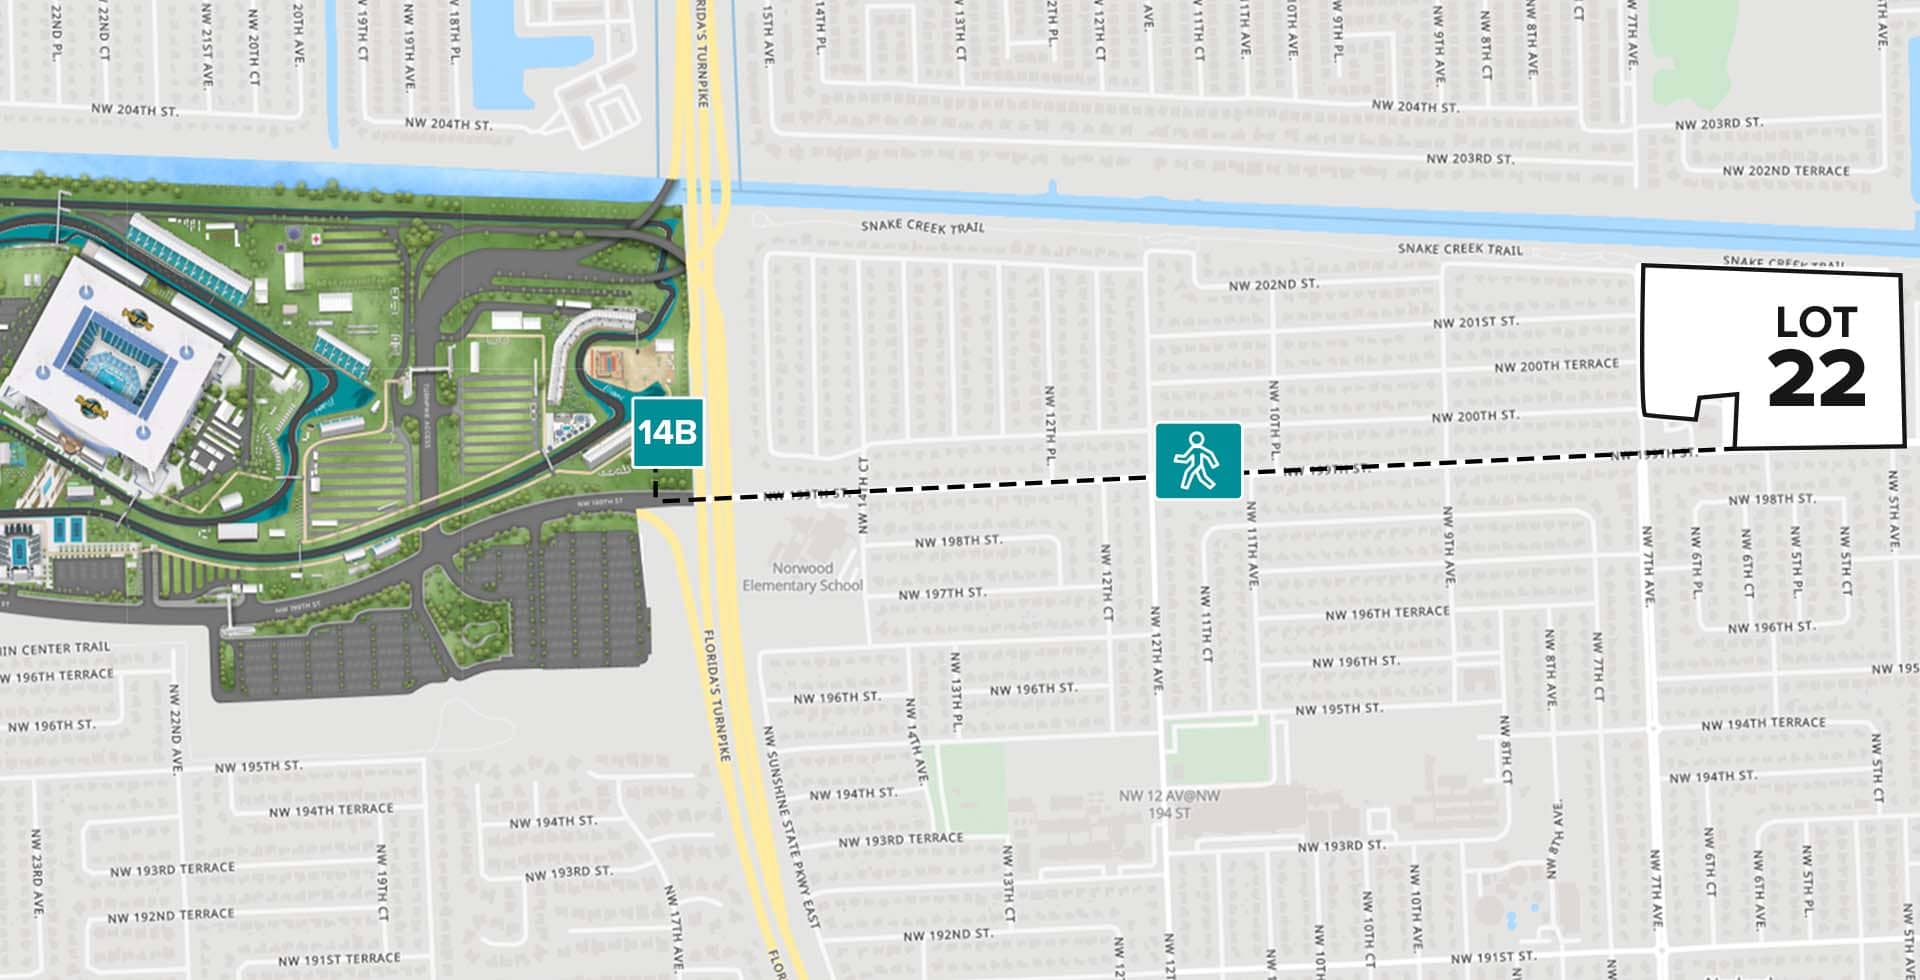 Parking Lot Location Map for White Lot 22 at the Formula 1 Crypto.com Miami Grand Prix